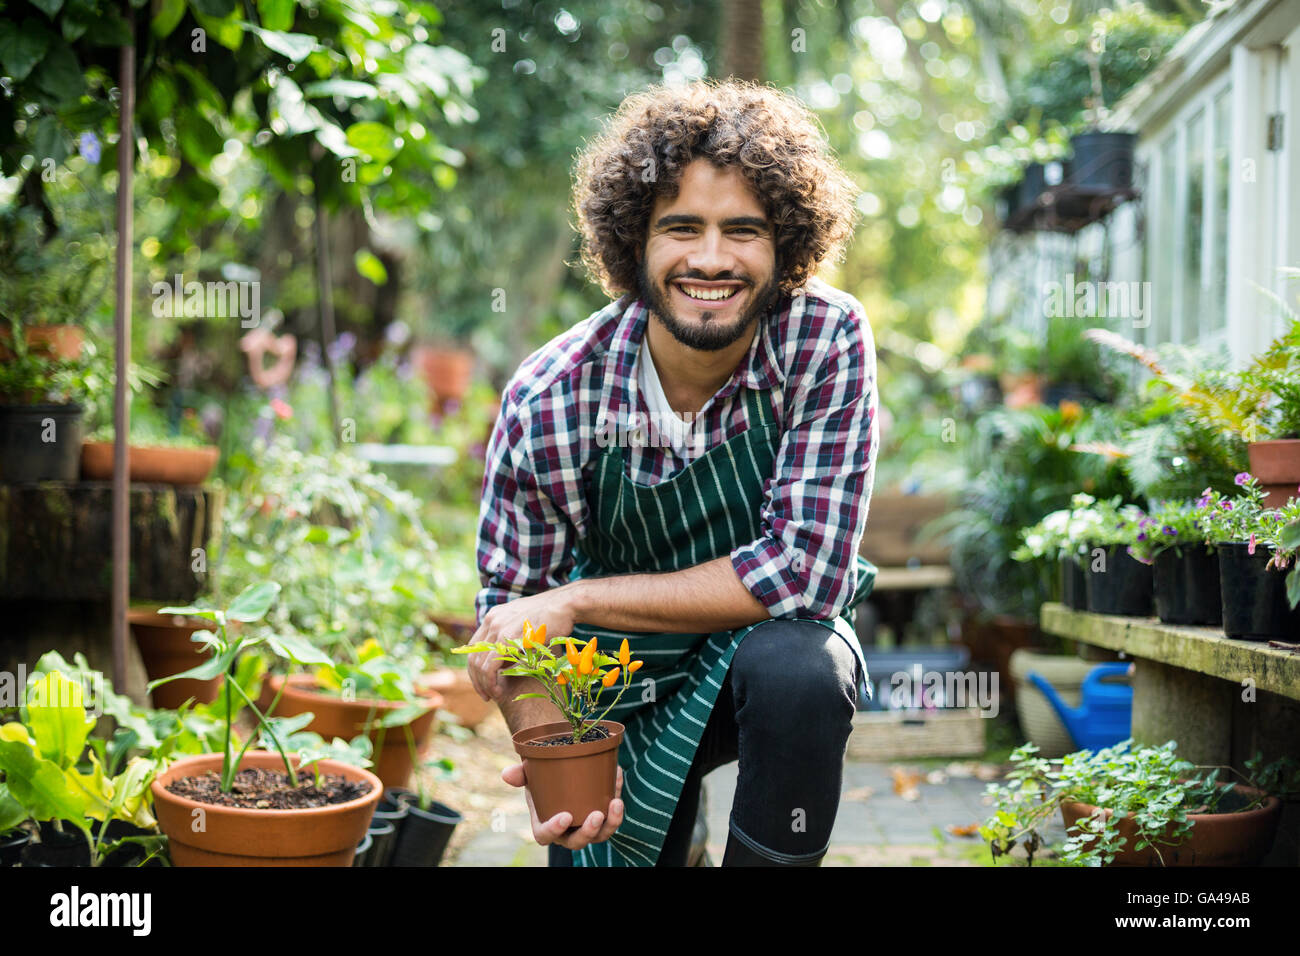 Smiling male gardener holding potted plant Stock Photo